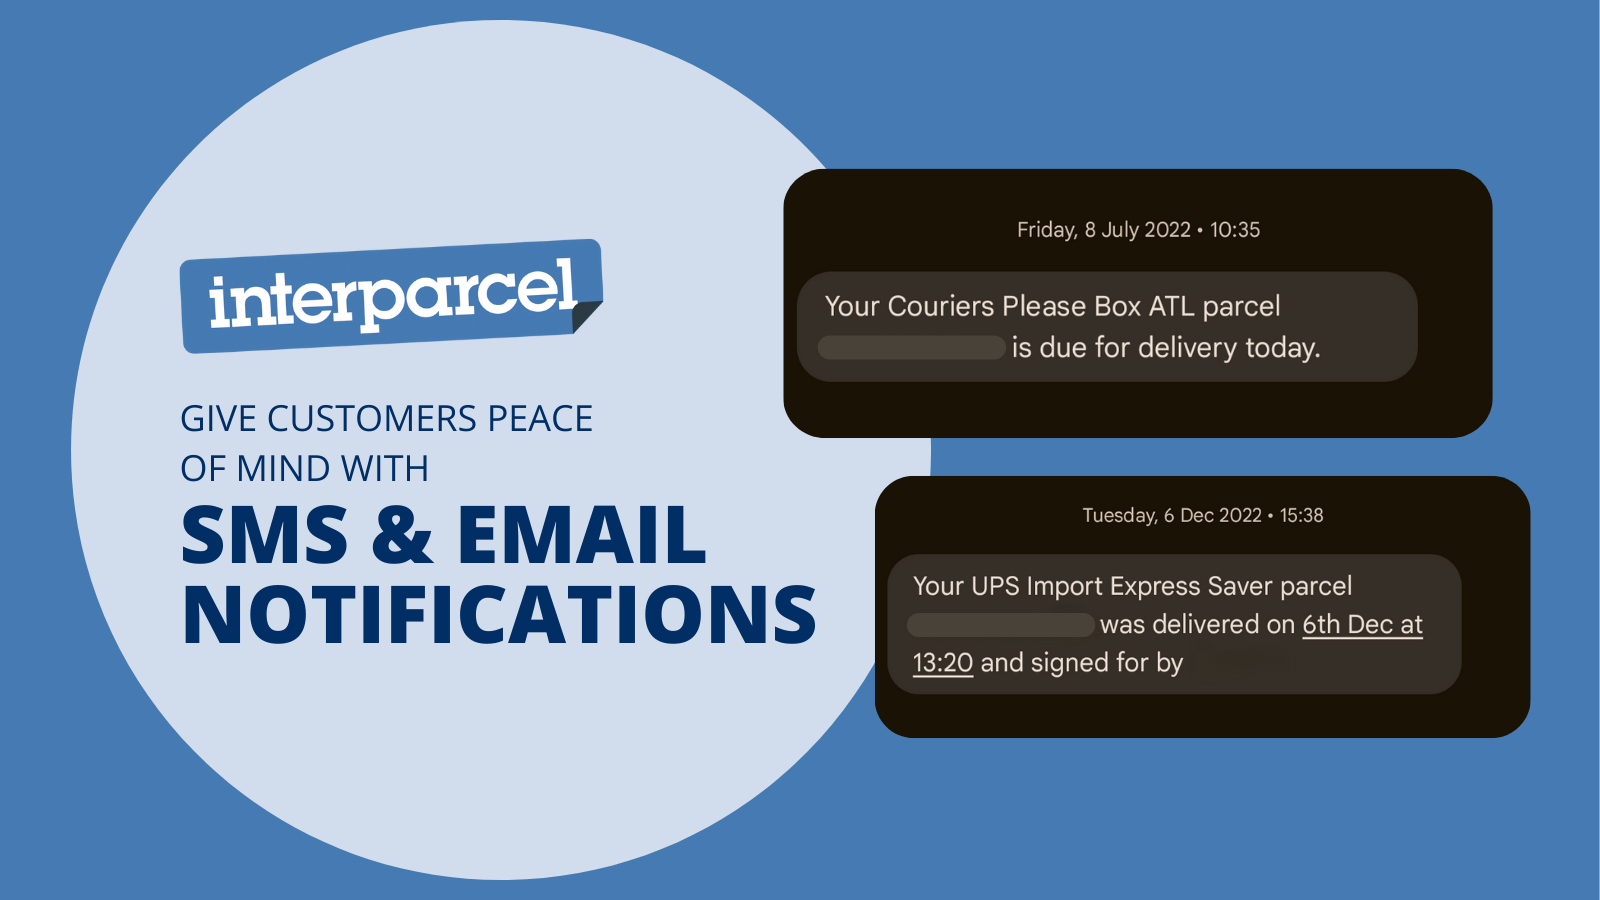 Give Customers Peace of Mind With SMS & Email Notifications